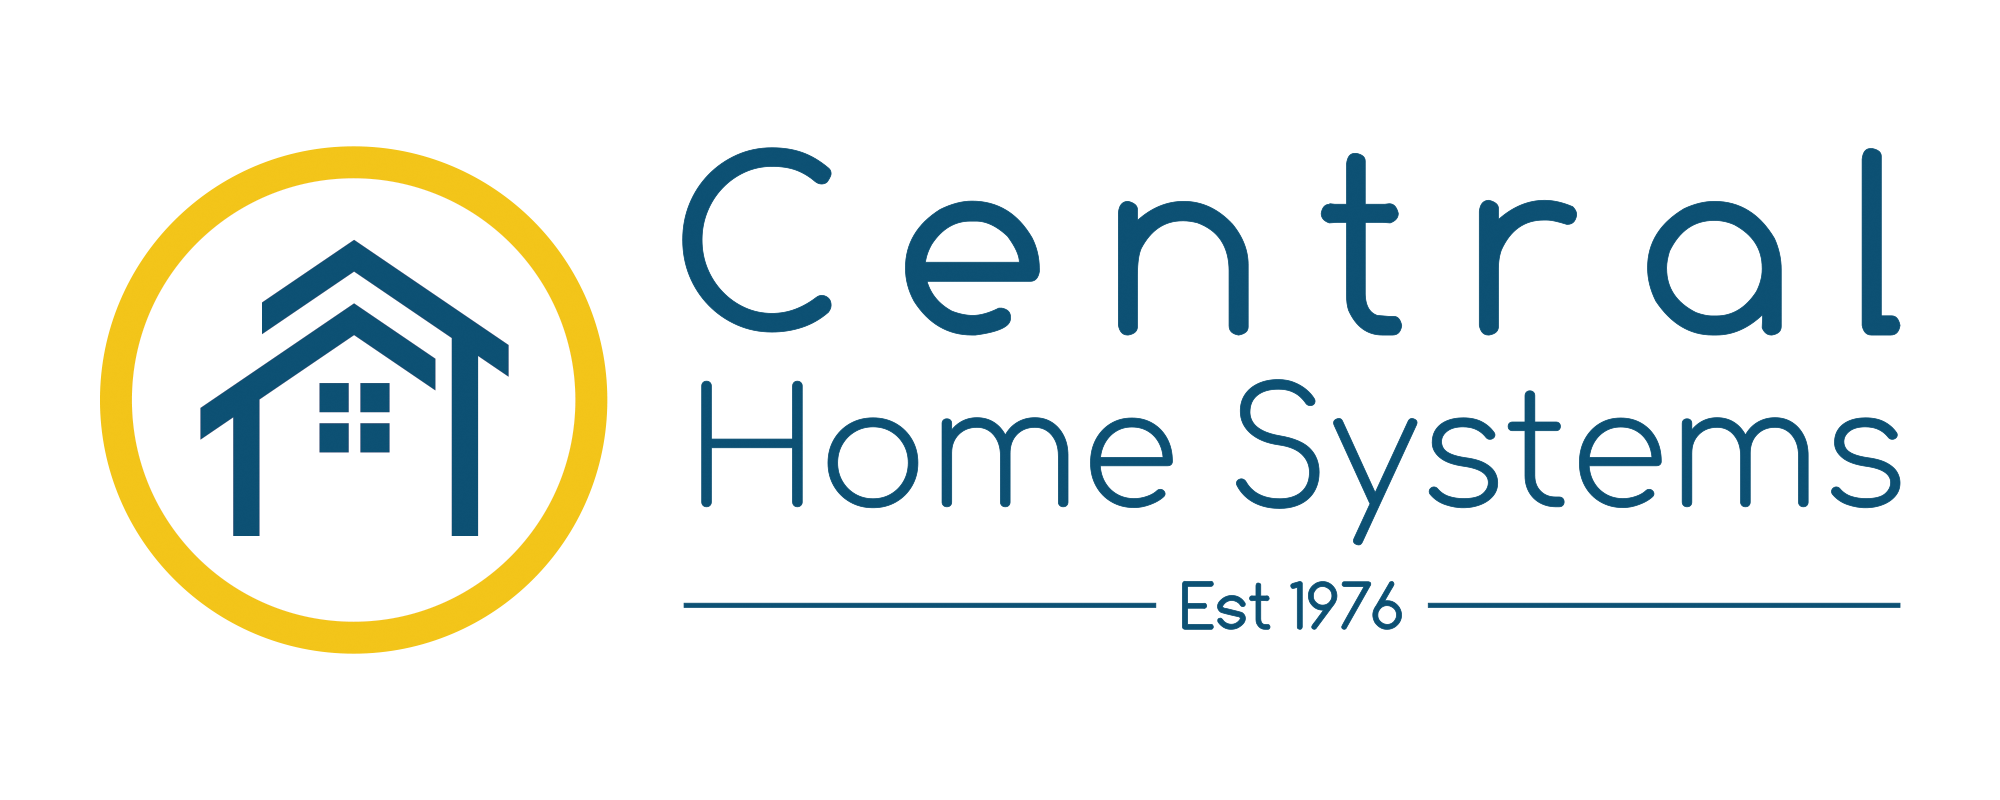 Central Home Systems